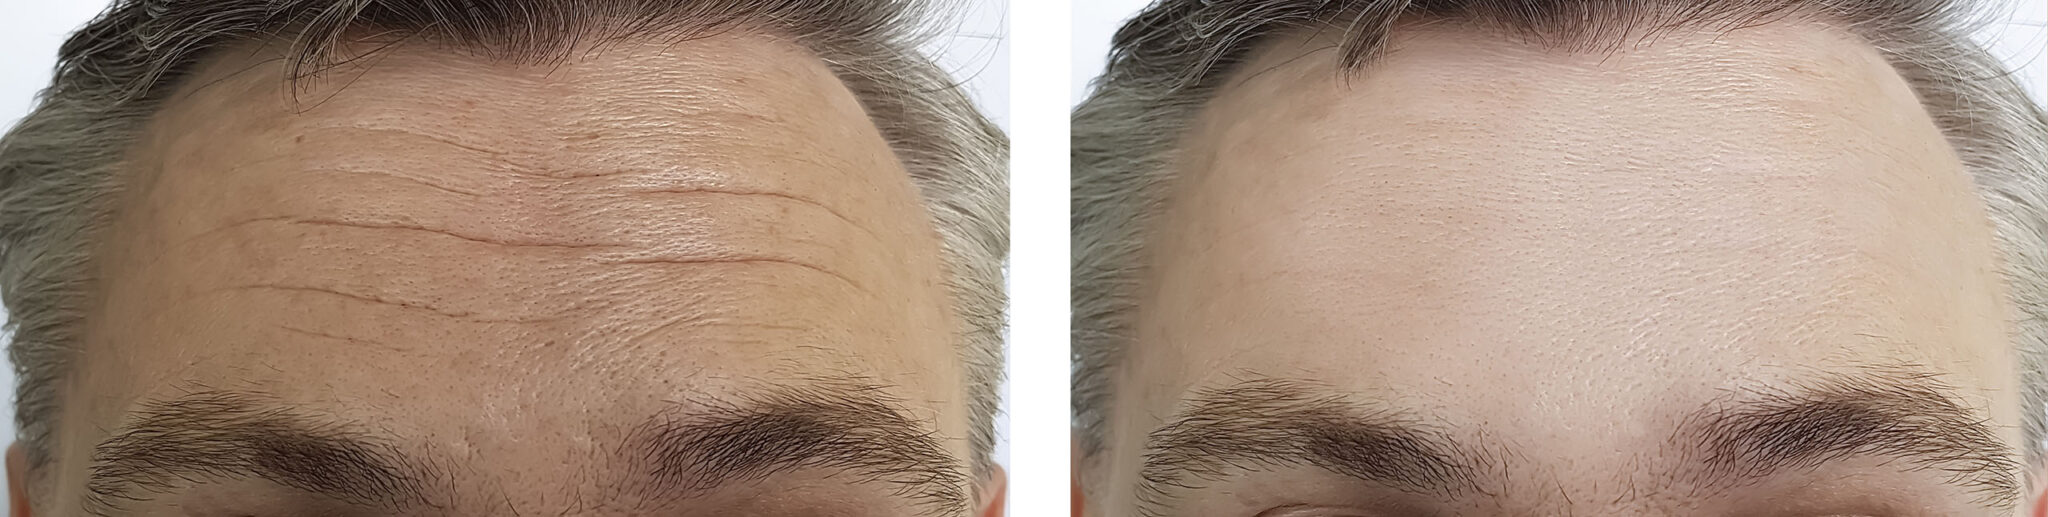 Botox Dentist Lisle, IL - Before and After forehead